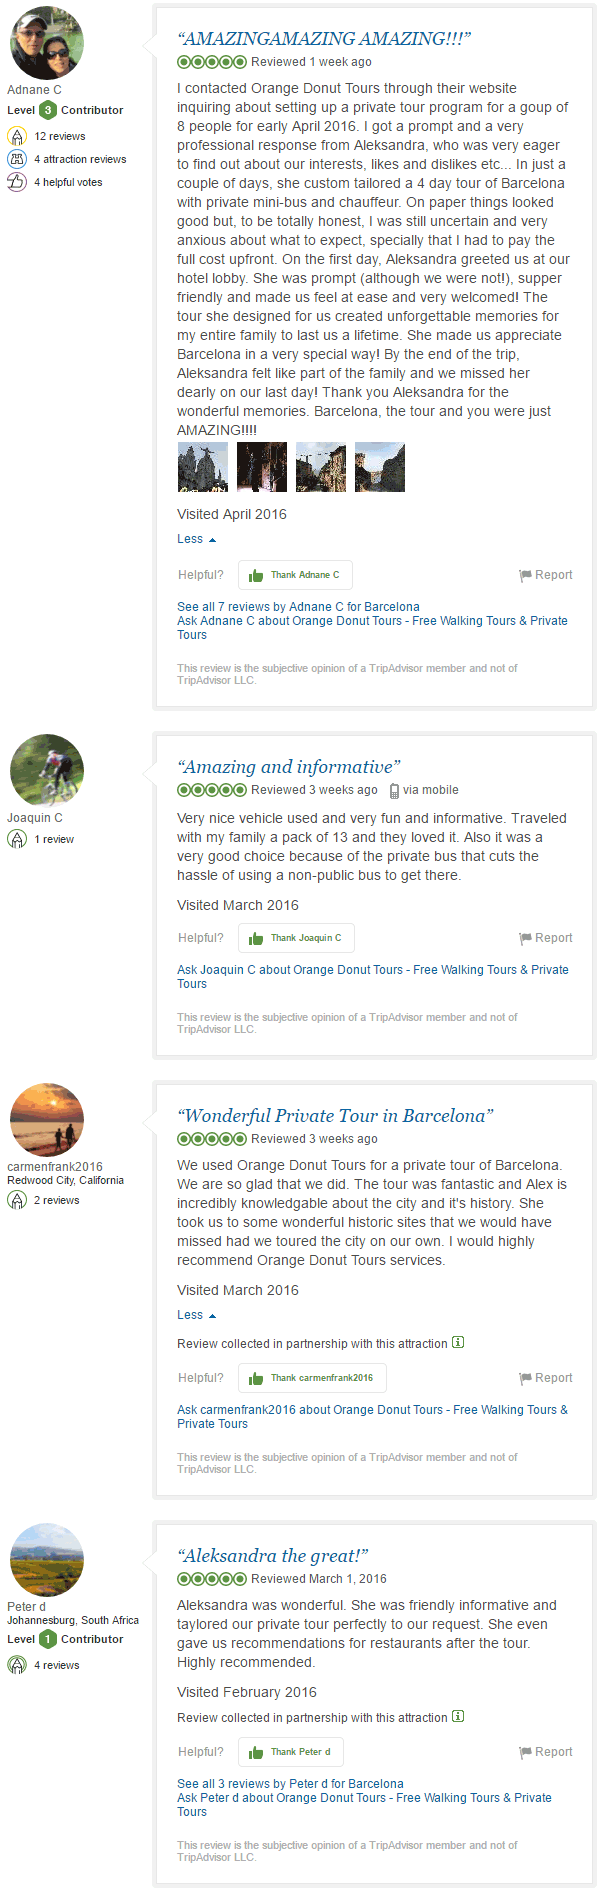 Private Tour Review from TripAdvisor